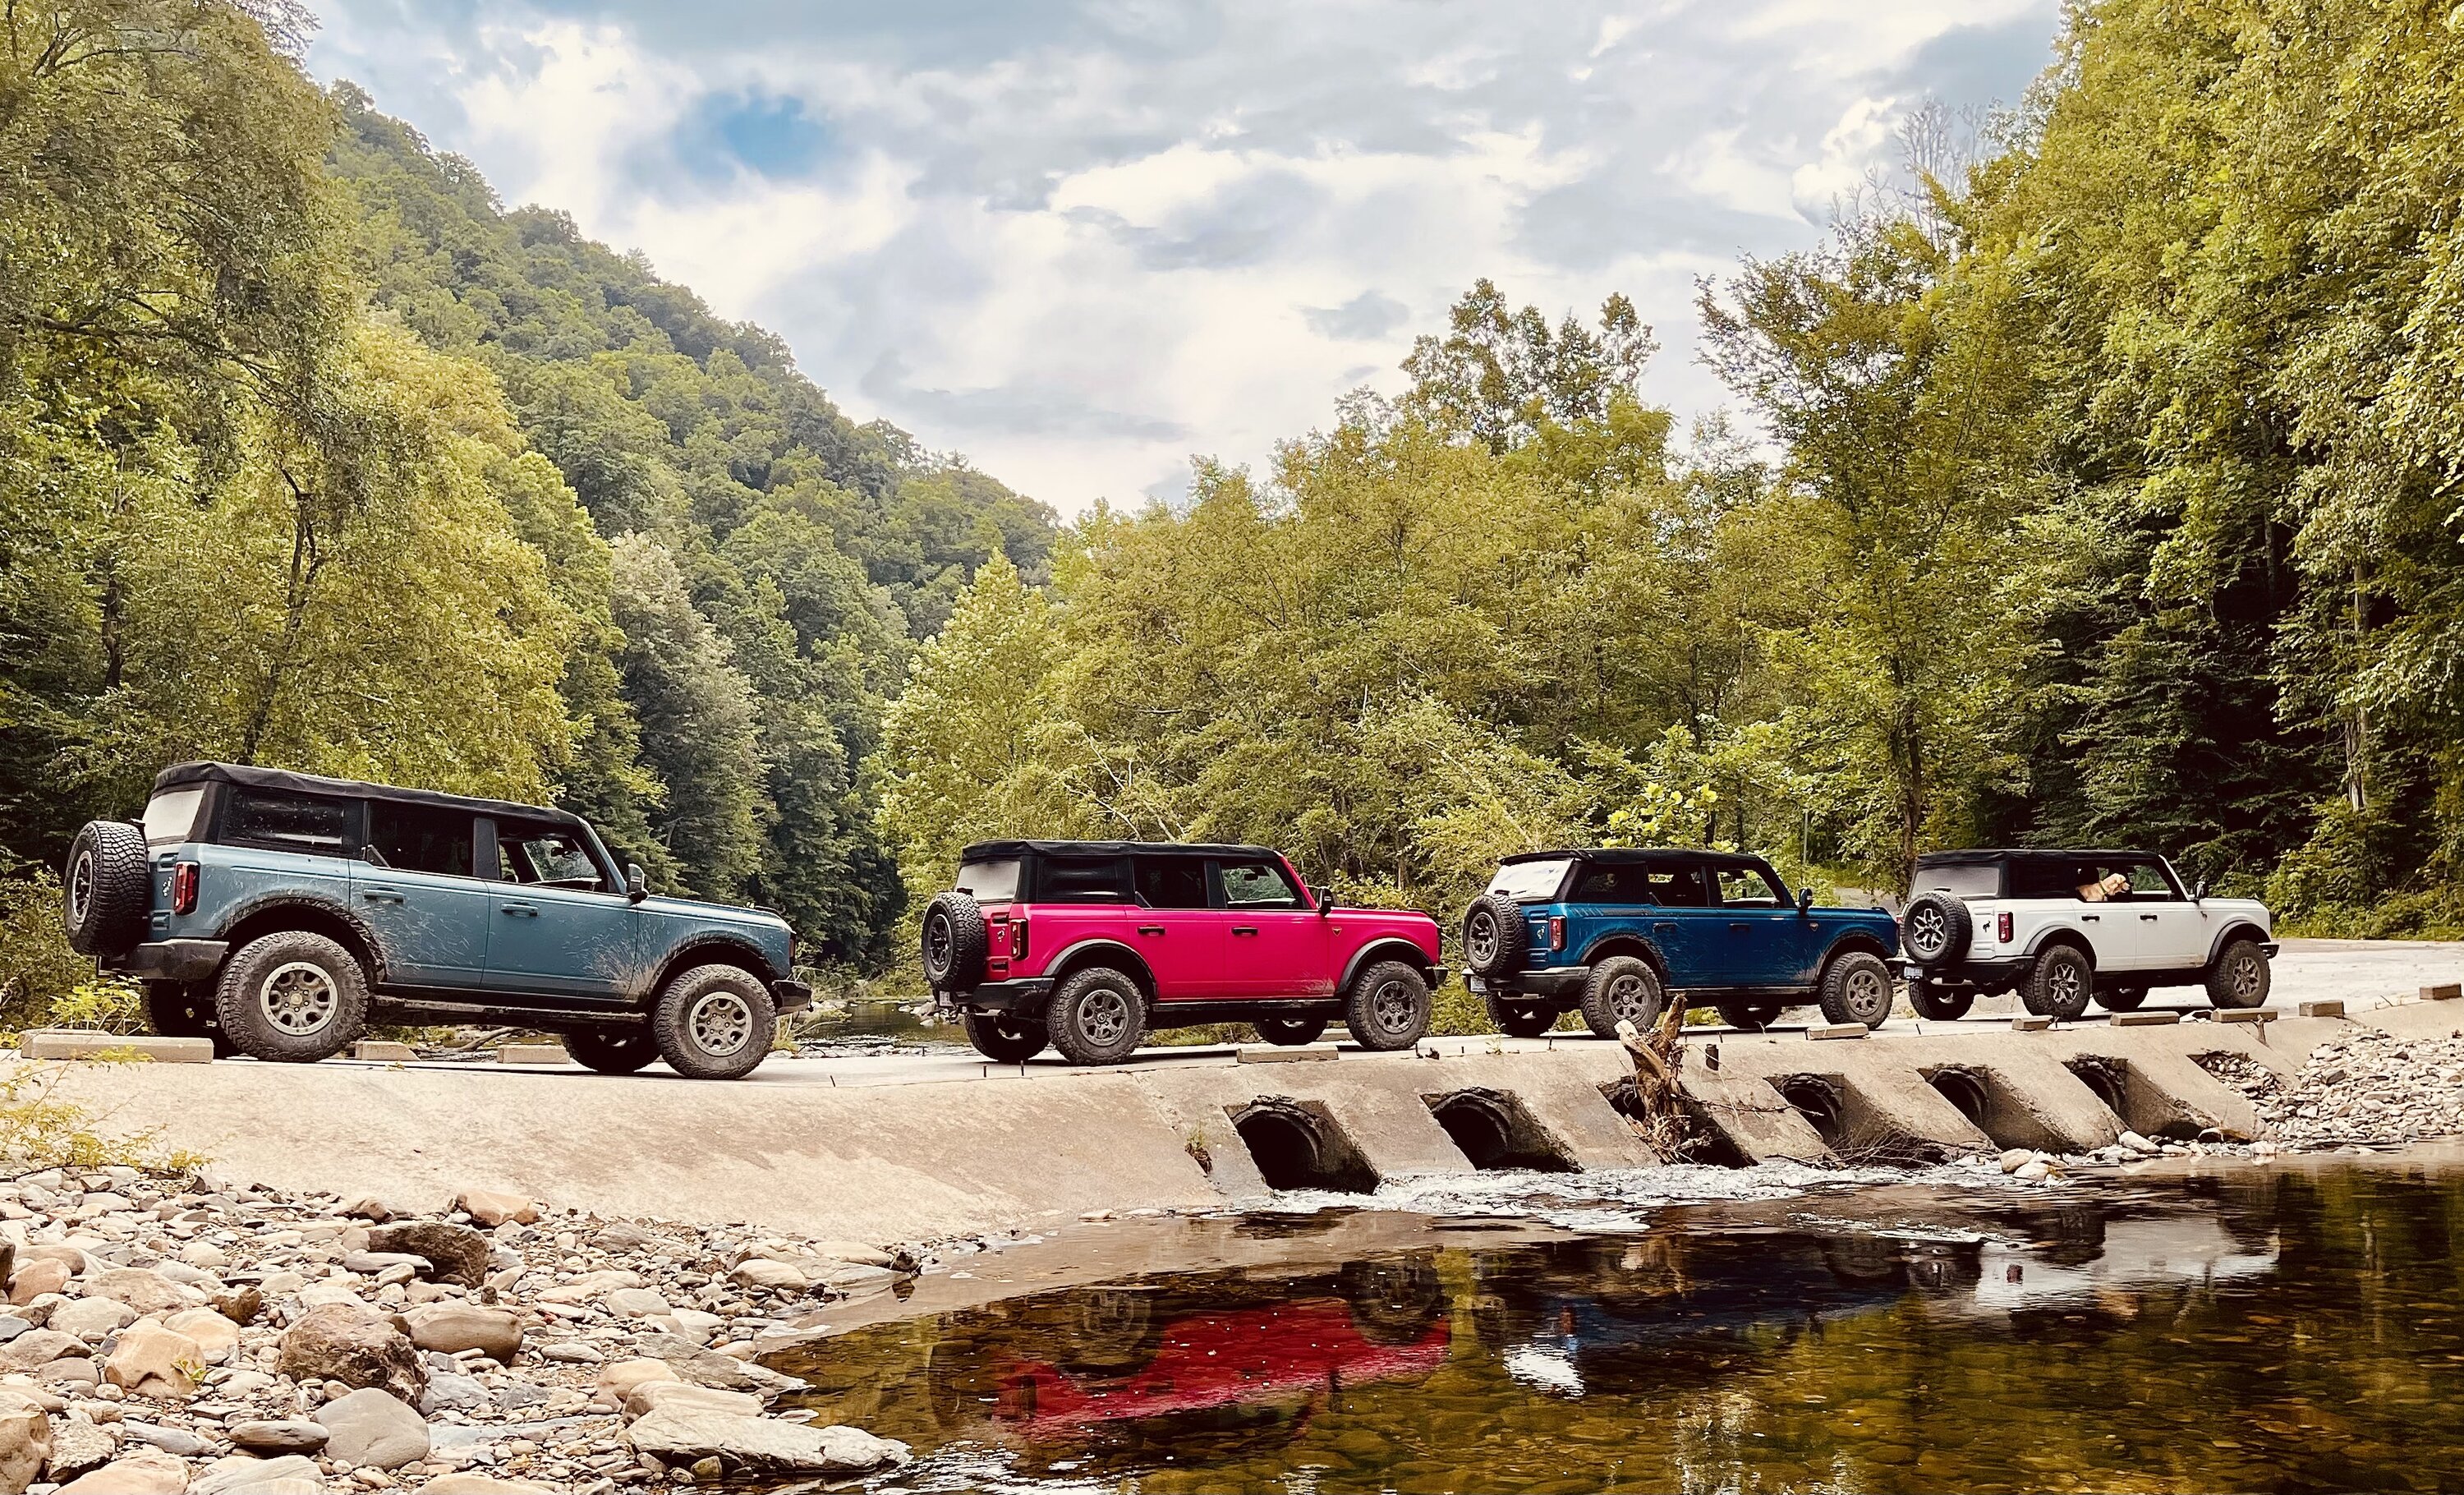 Ford Bronco Bronco Round-Up Recap Video ( Cataloochee Valley / Forest Roads) 4A451FE4-E395-4BD1-8630-282A11EA0DB0